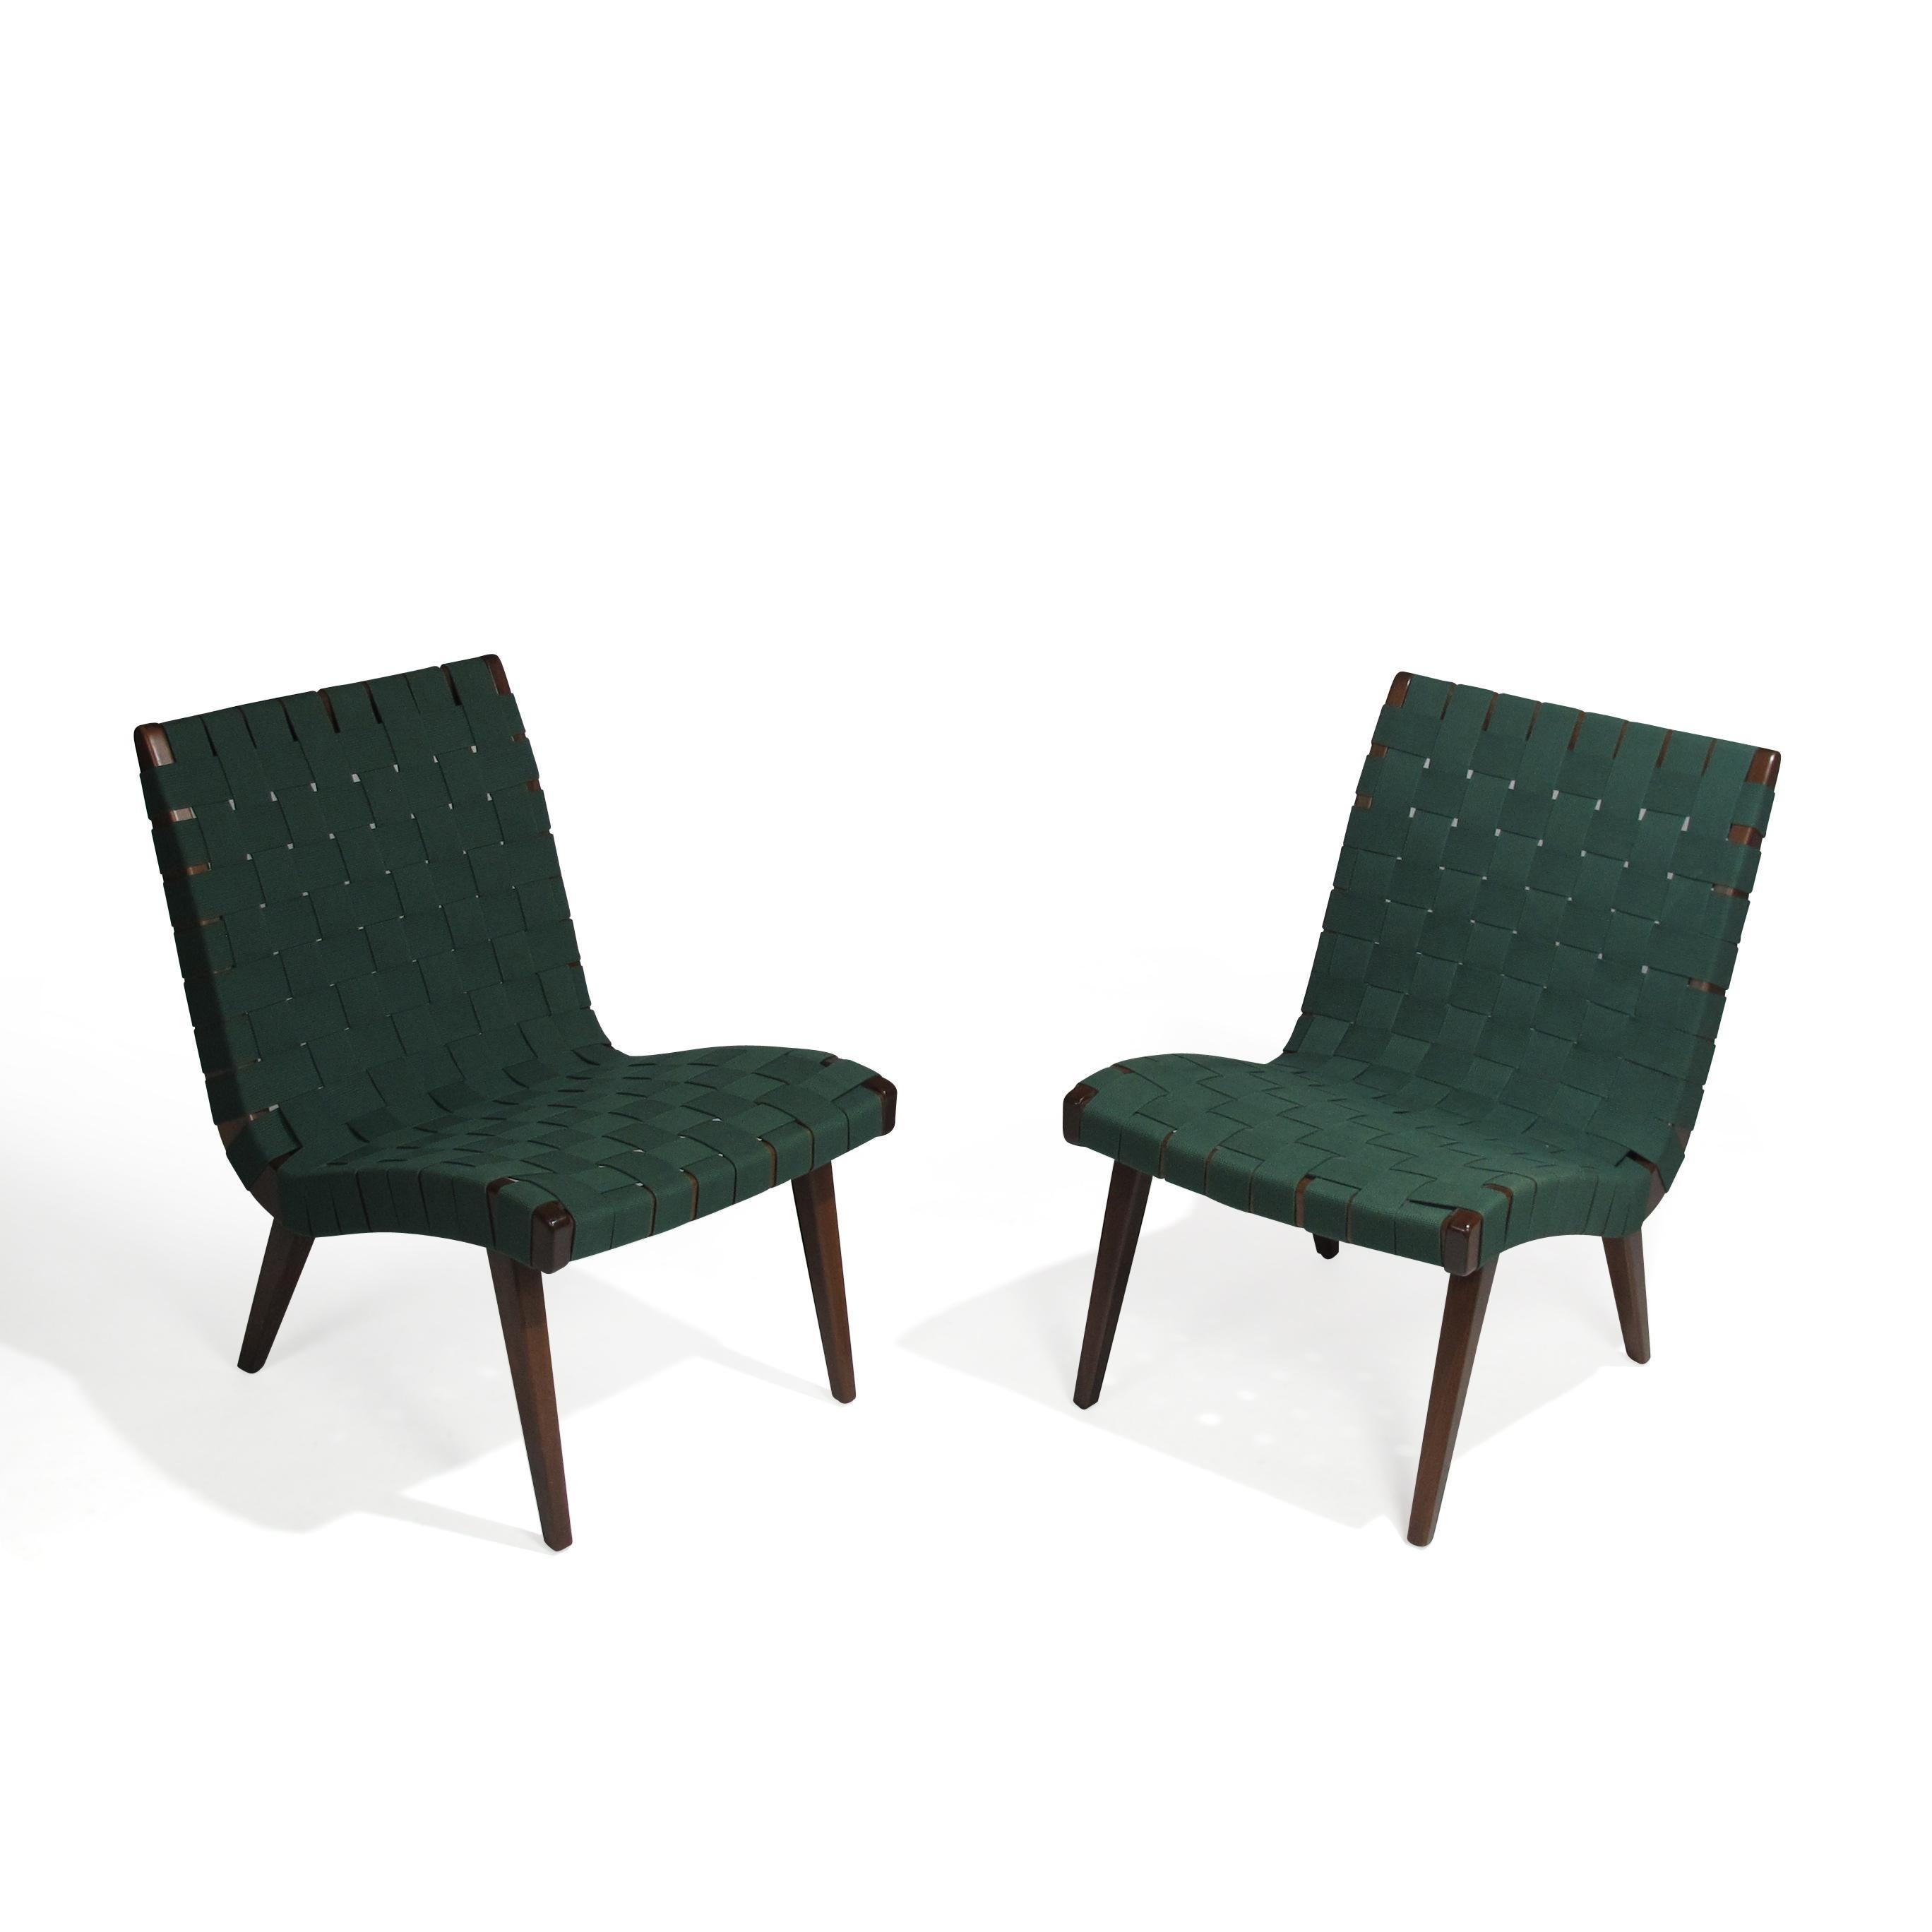 Pair of armless lounge chairs designed by Jens Risom for Knoll. Frames of solid maple with an ebonized walnut finish and forest green cotton webbing.